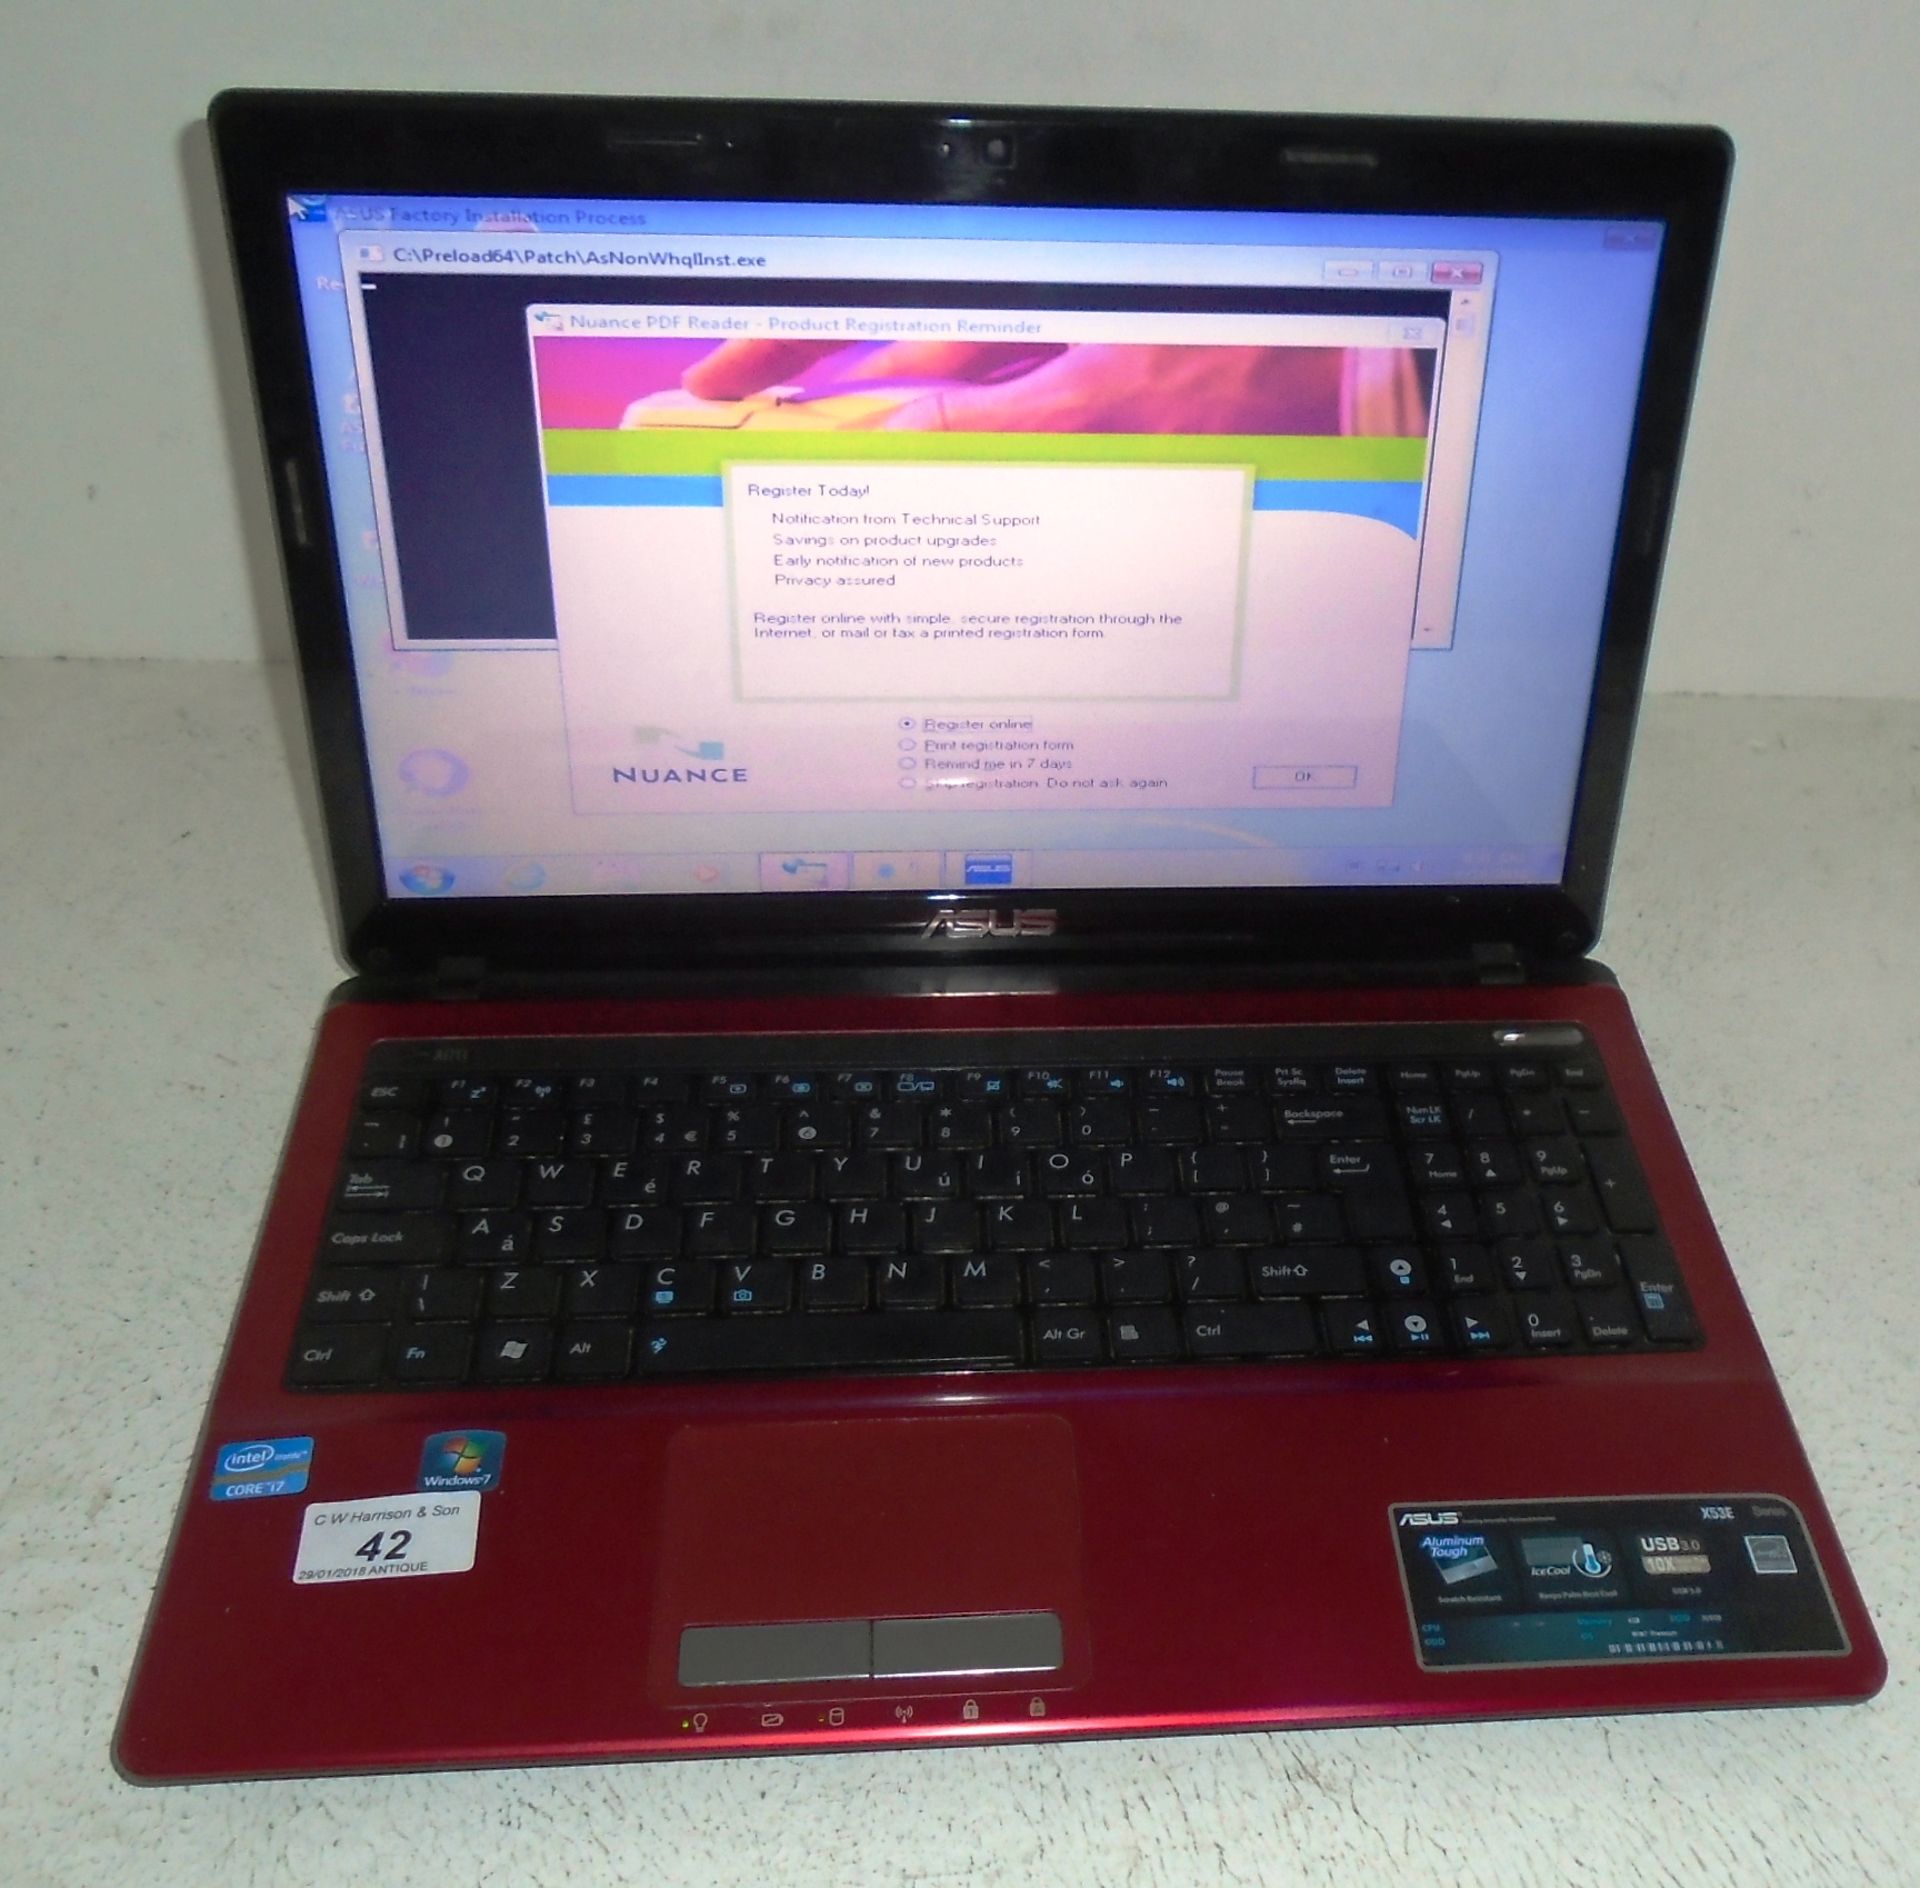 An Asus X53E laptop computer with Windows 7 - no charger